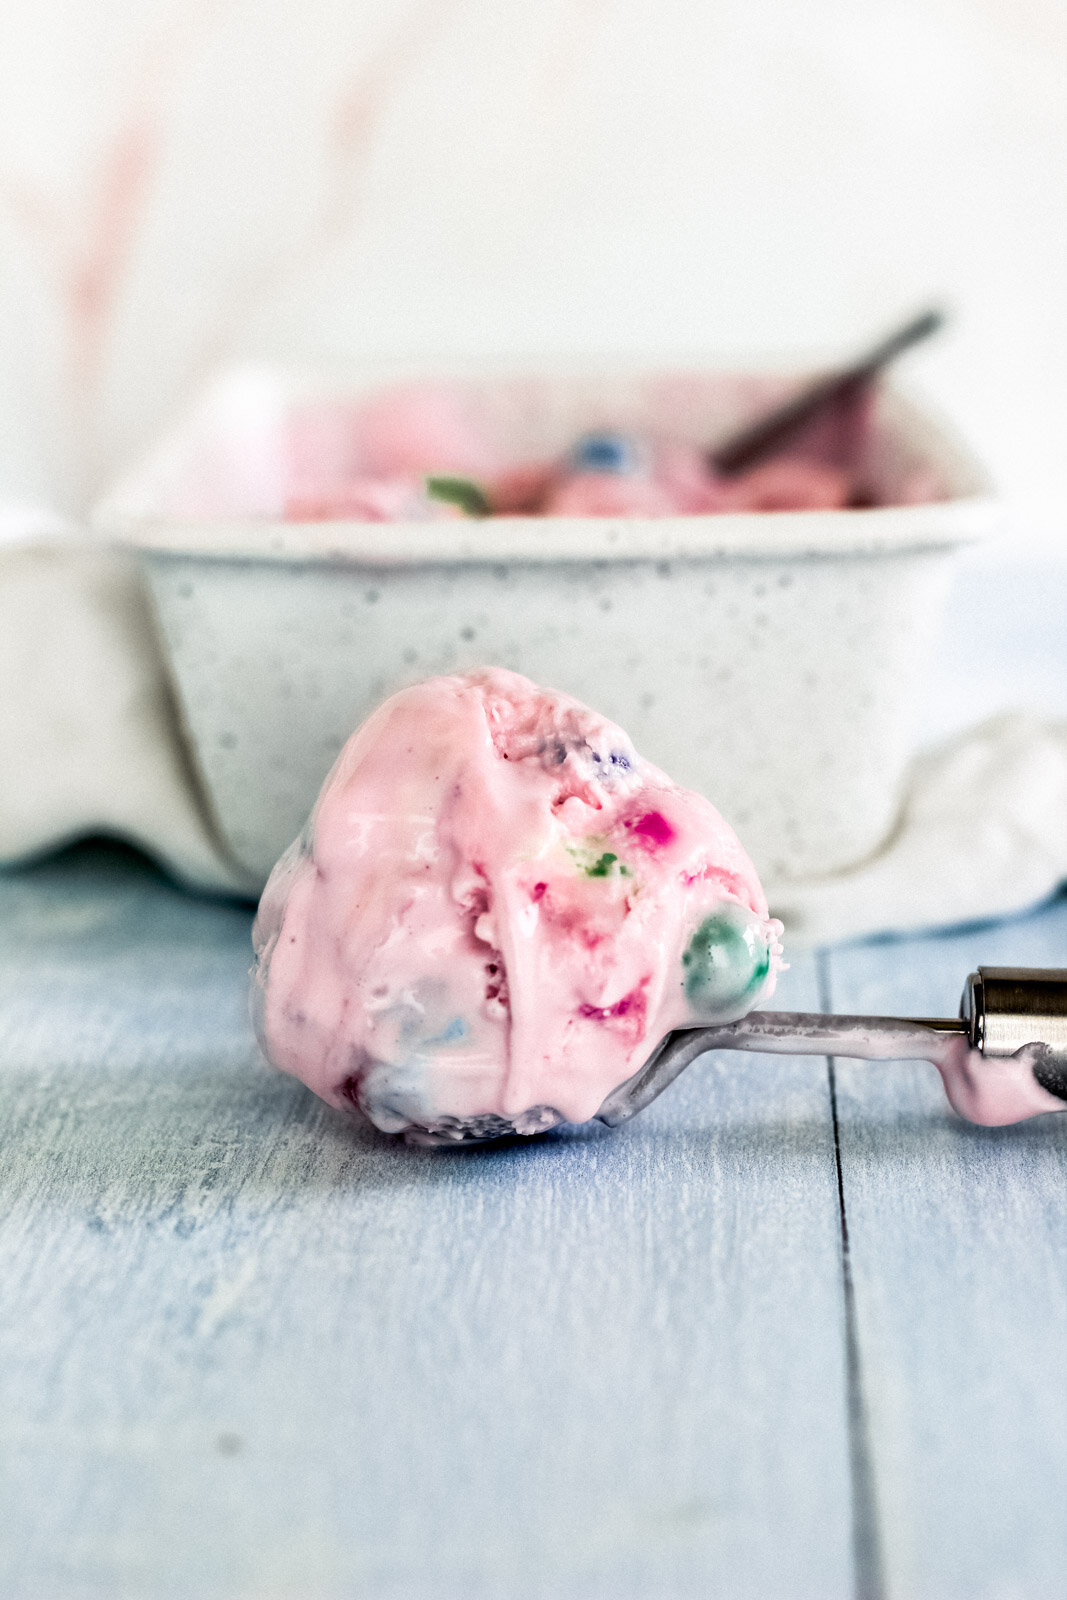 A scoop of a pink bubblegum ice cream recipe sits on a table